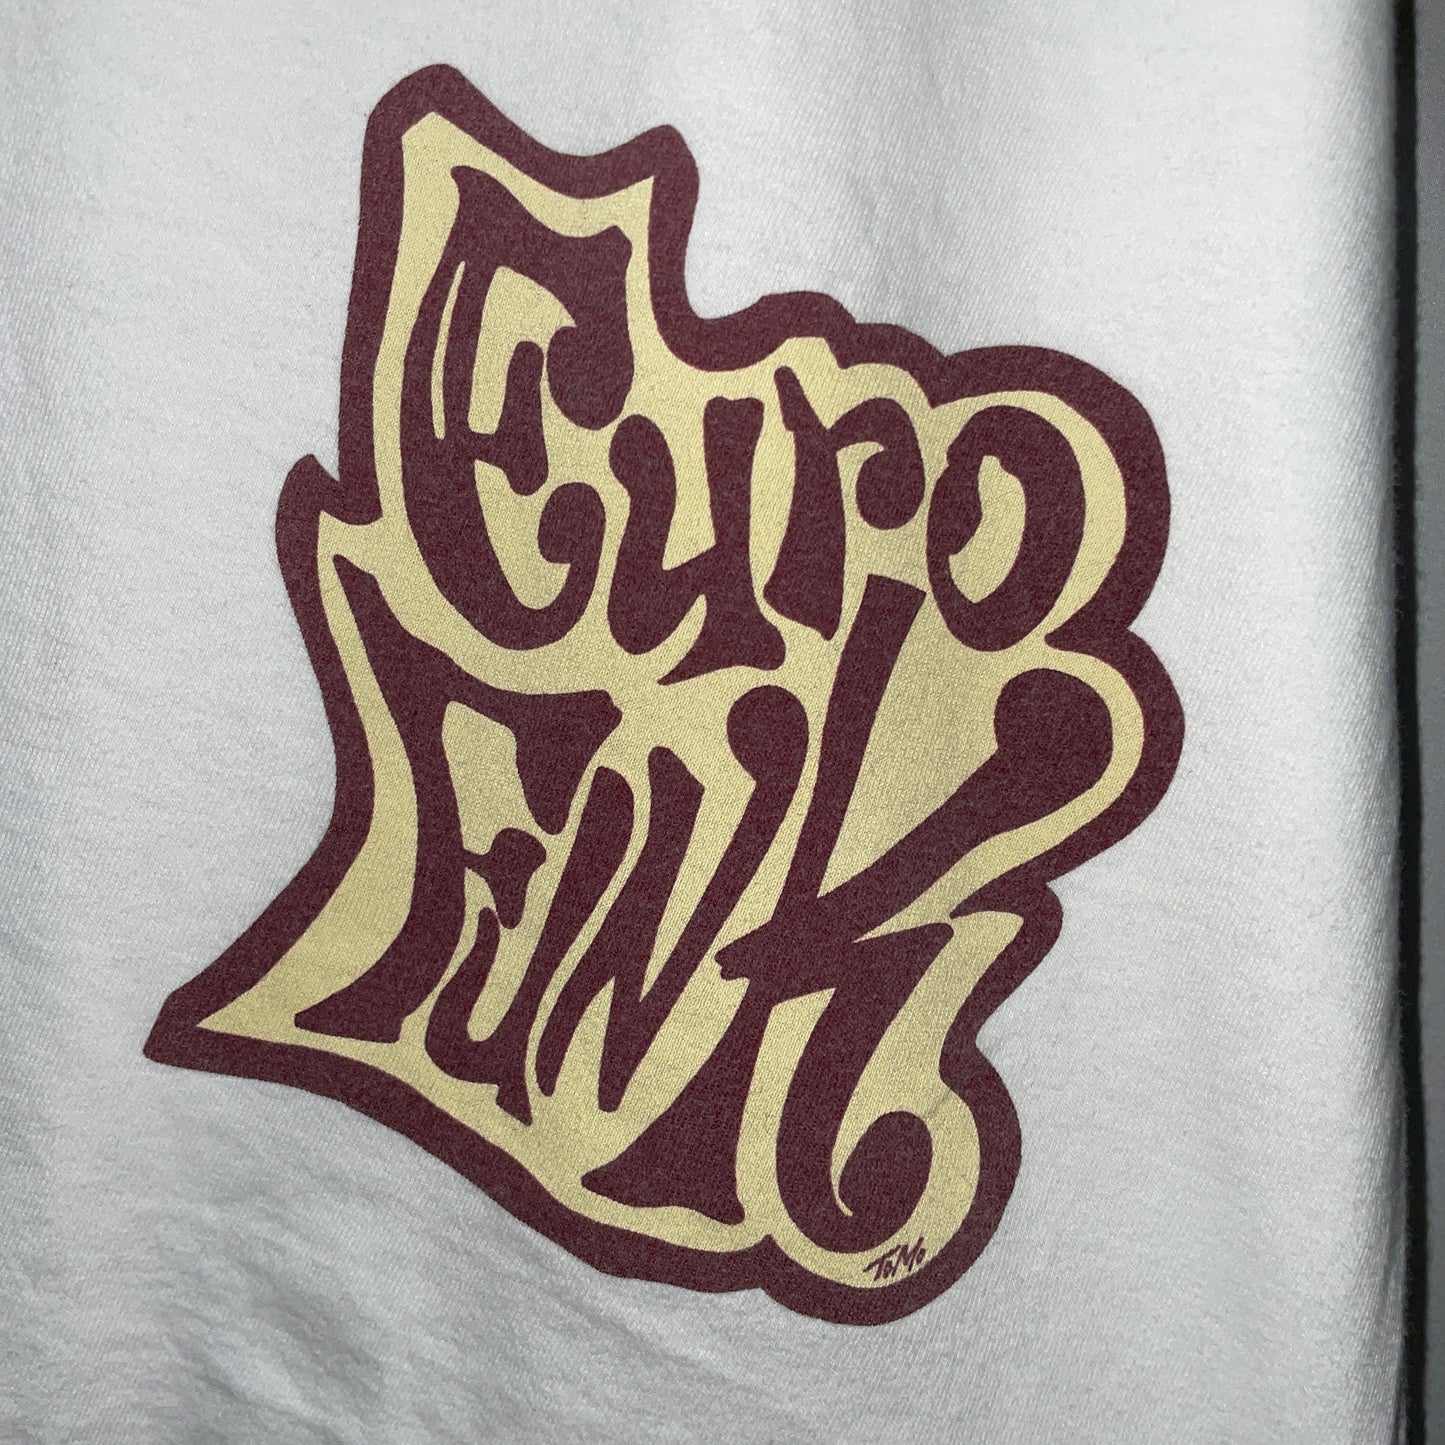 Euro funk Tee made in USA Tシャツ